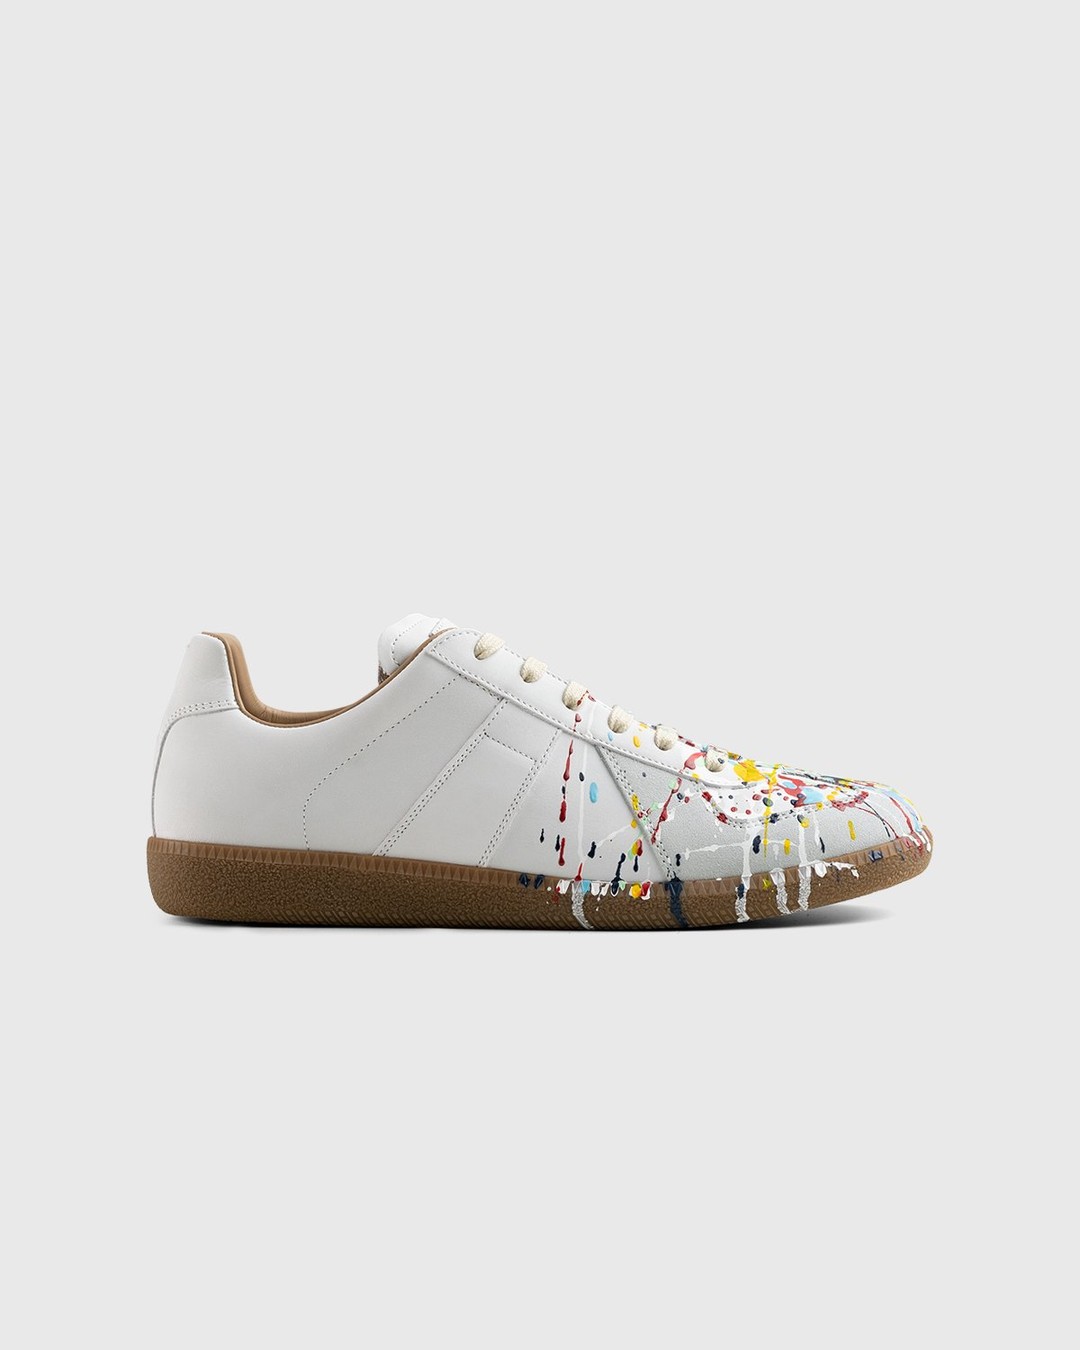 Maison Margiela – Replica Paint Drop Sneakers White - Low Top Sneakers - White - Image 1